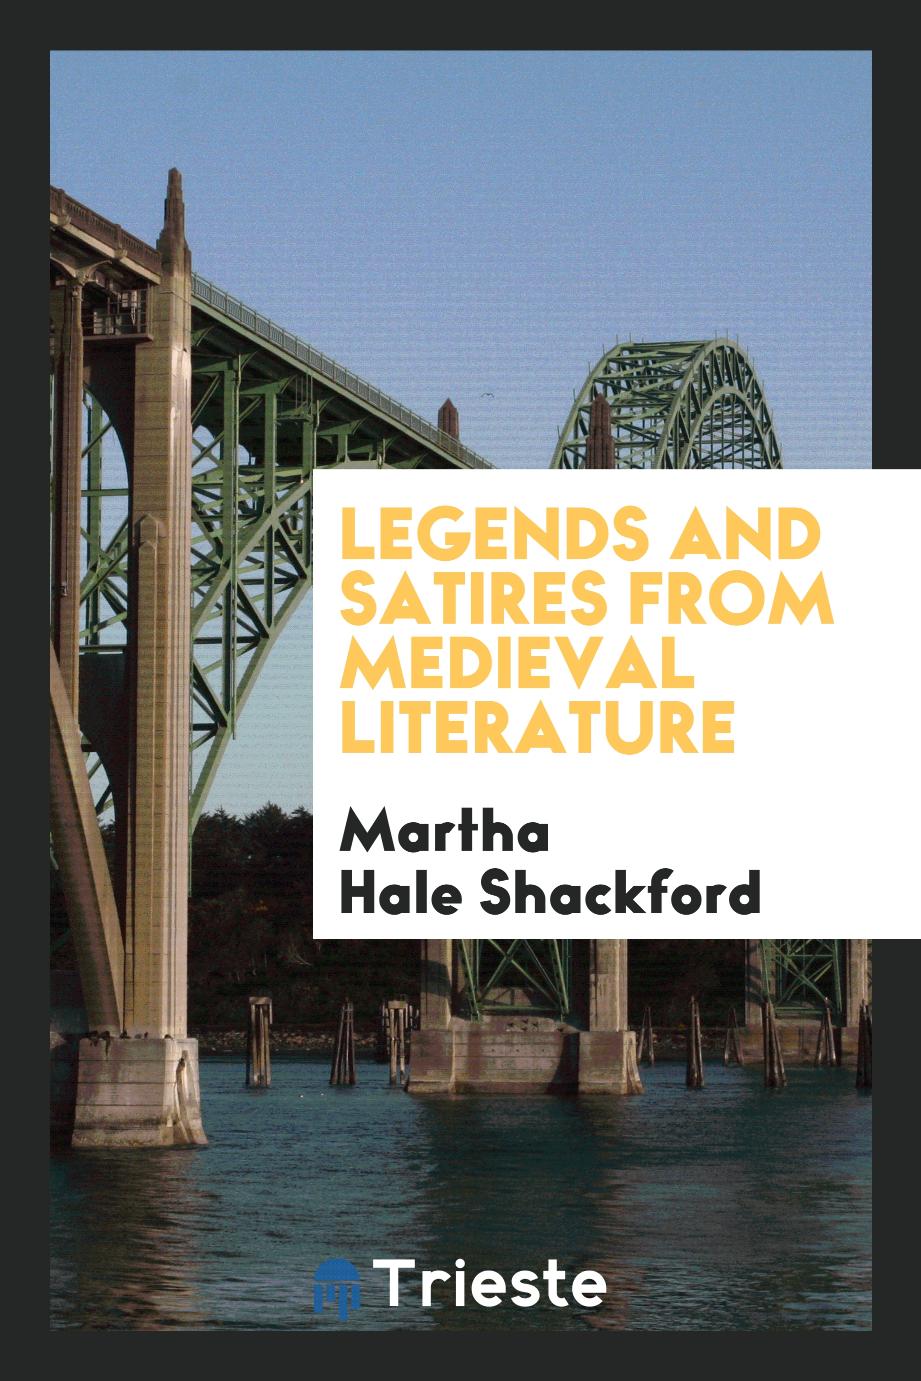 Legends and satires from medieval literature